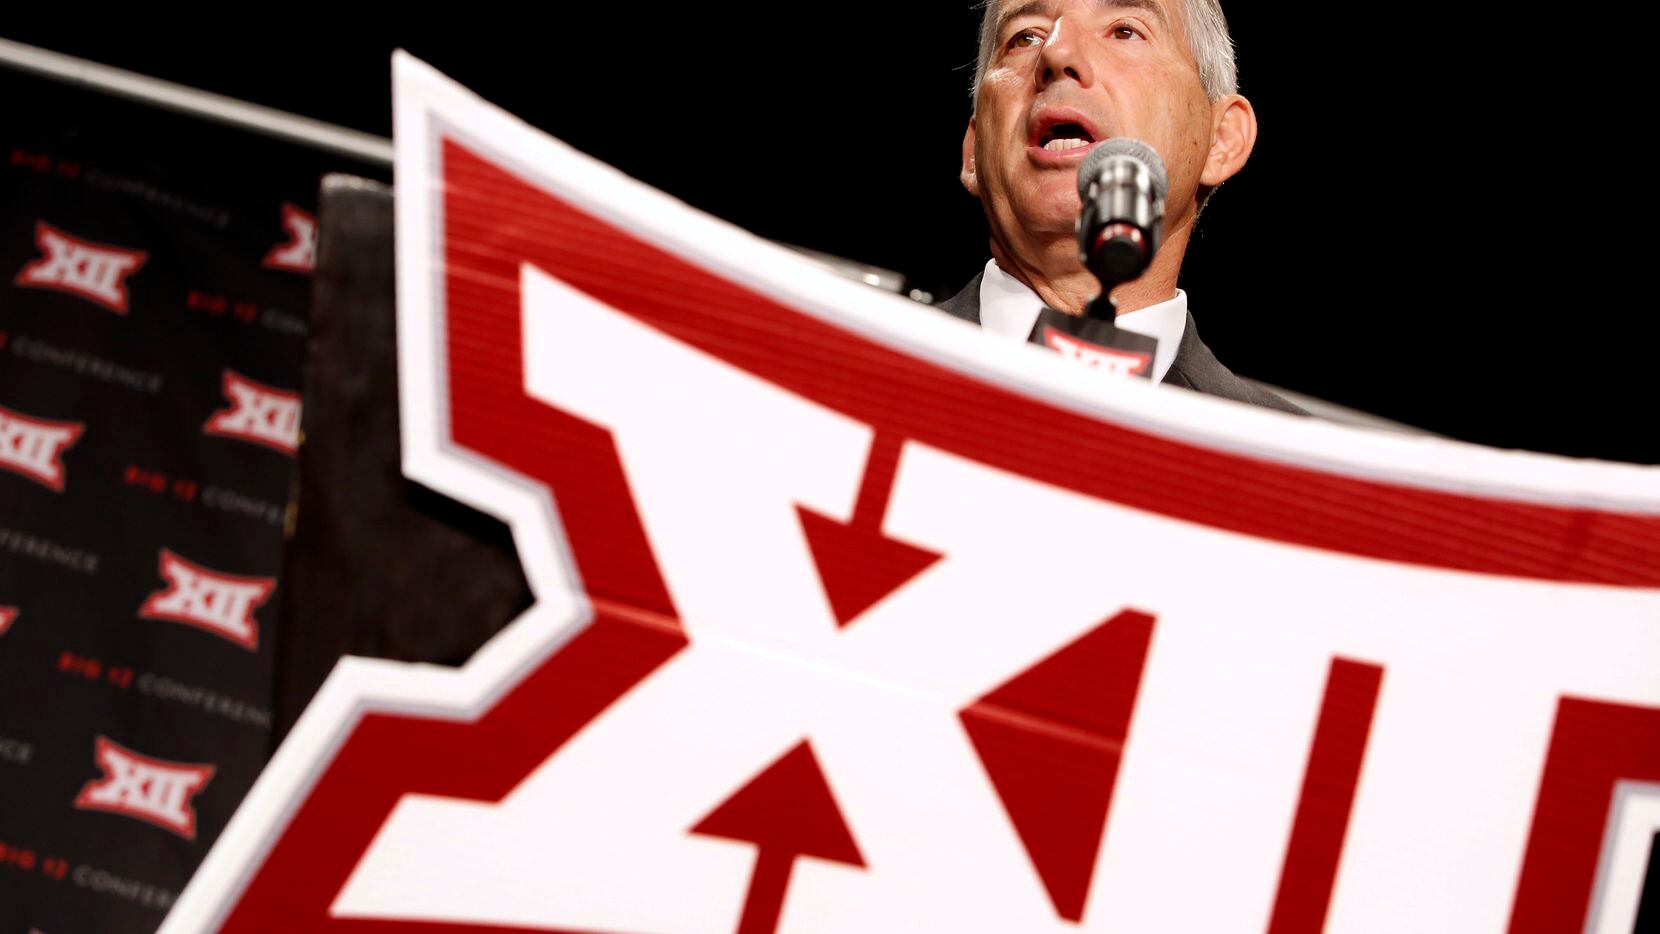 From behind the podium, Big XII Commissioner Bob Bowlsby address the media assembled for the...